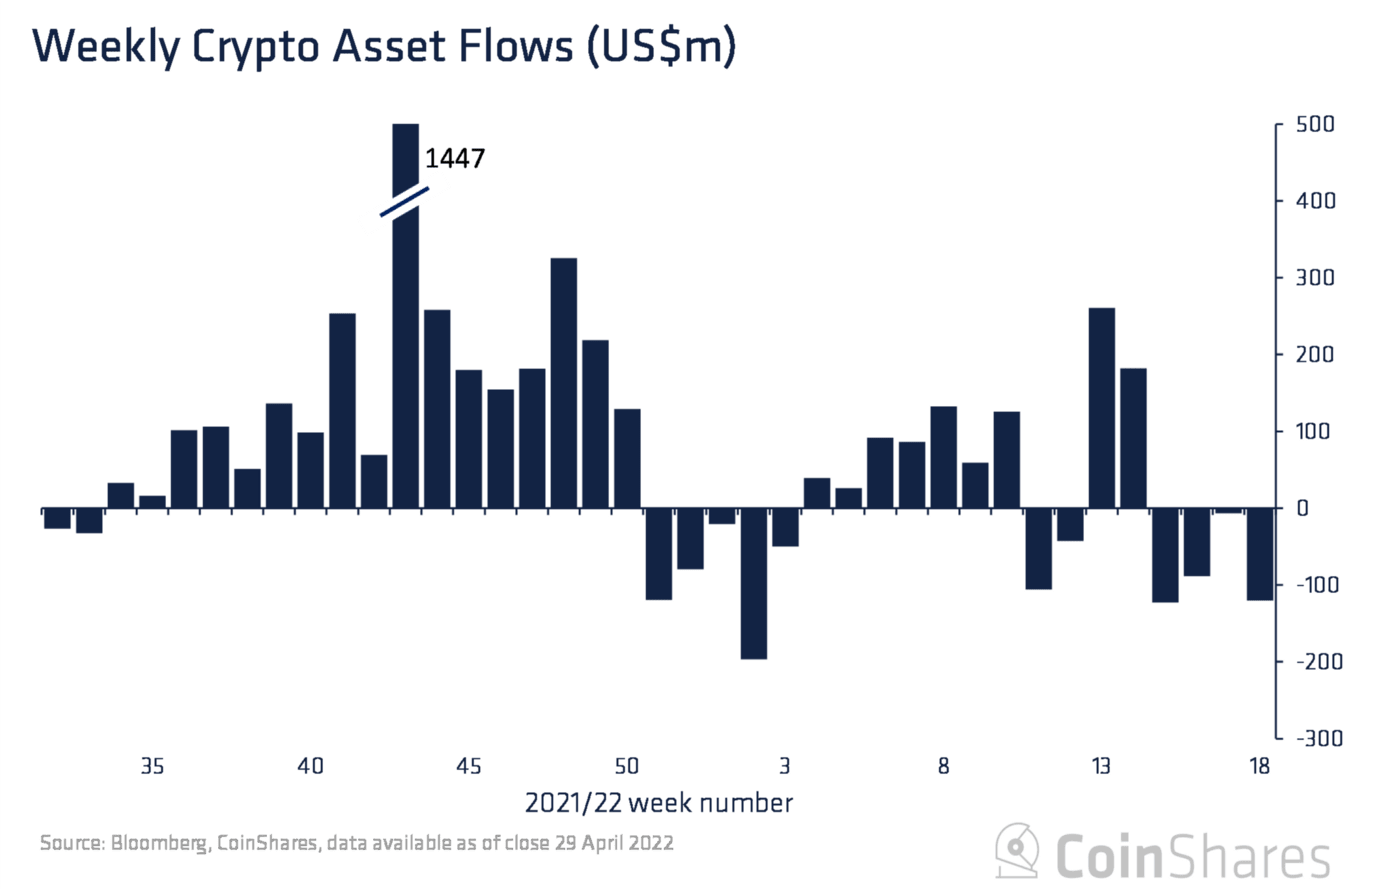 CoinShares chart featuring weekly crypto asset flows.